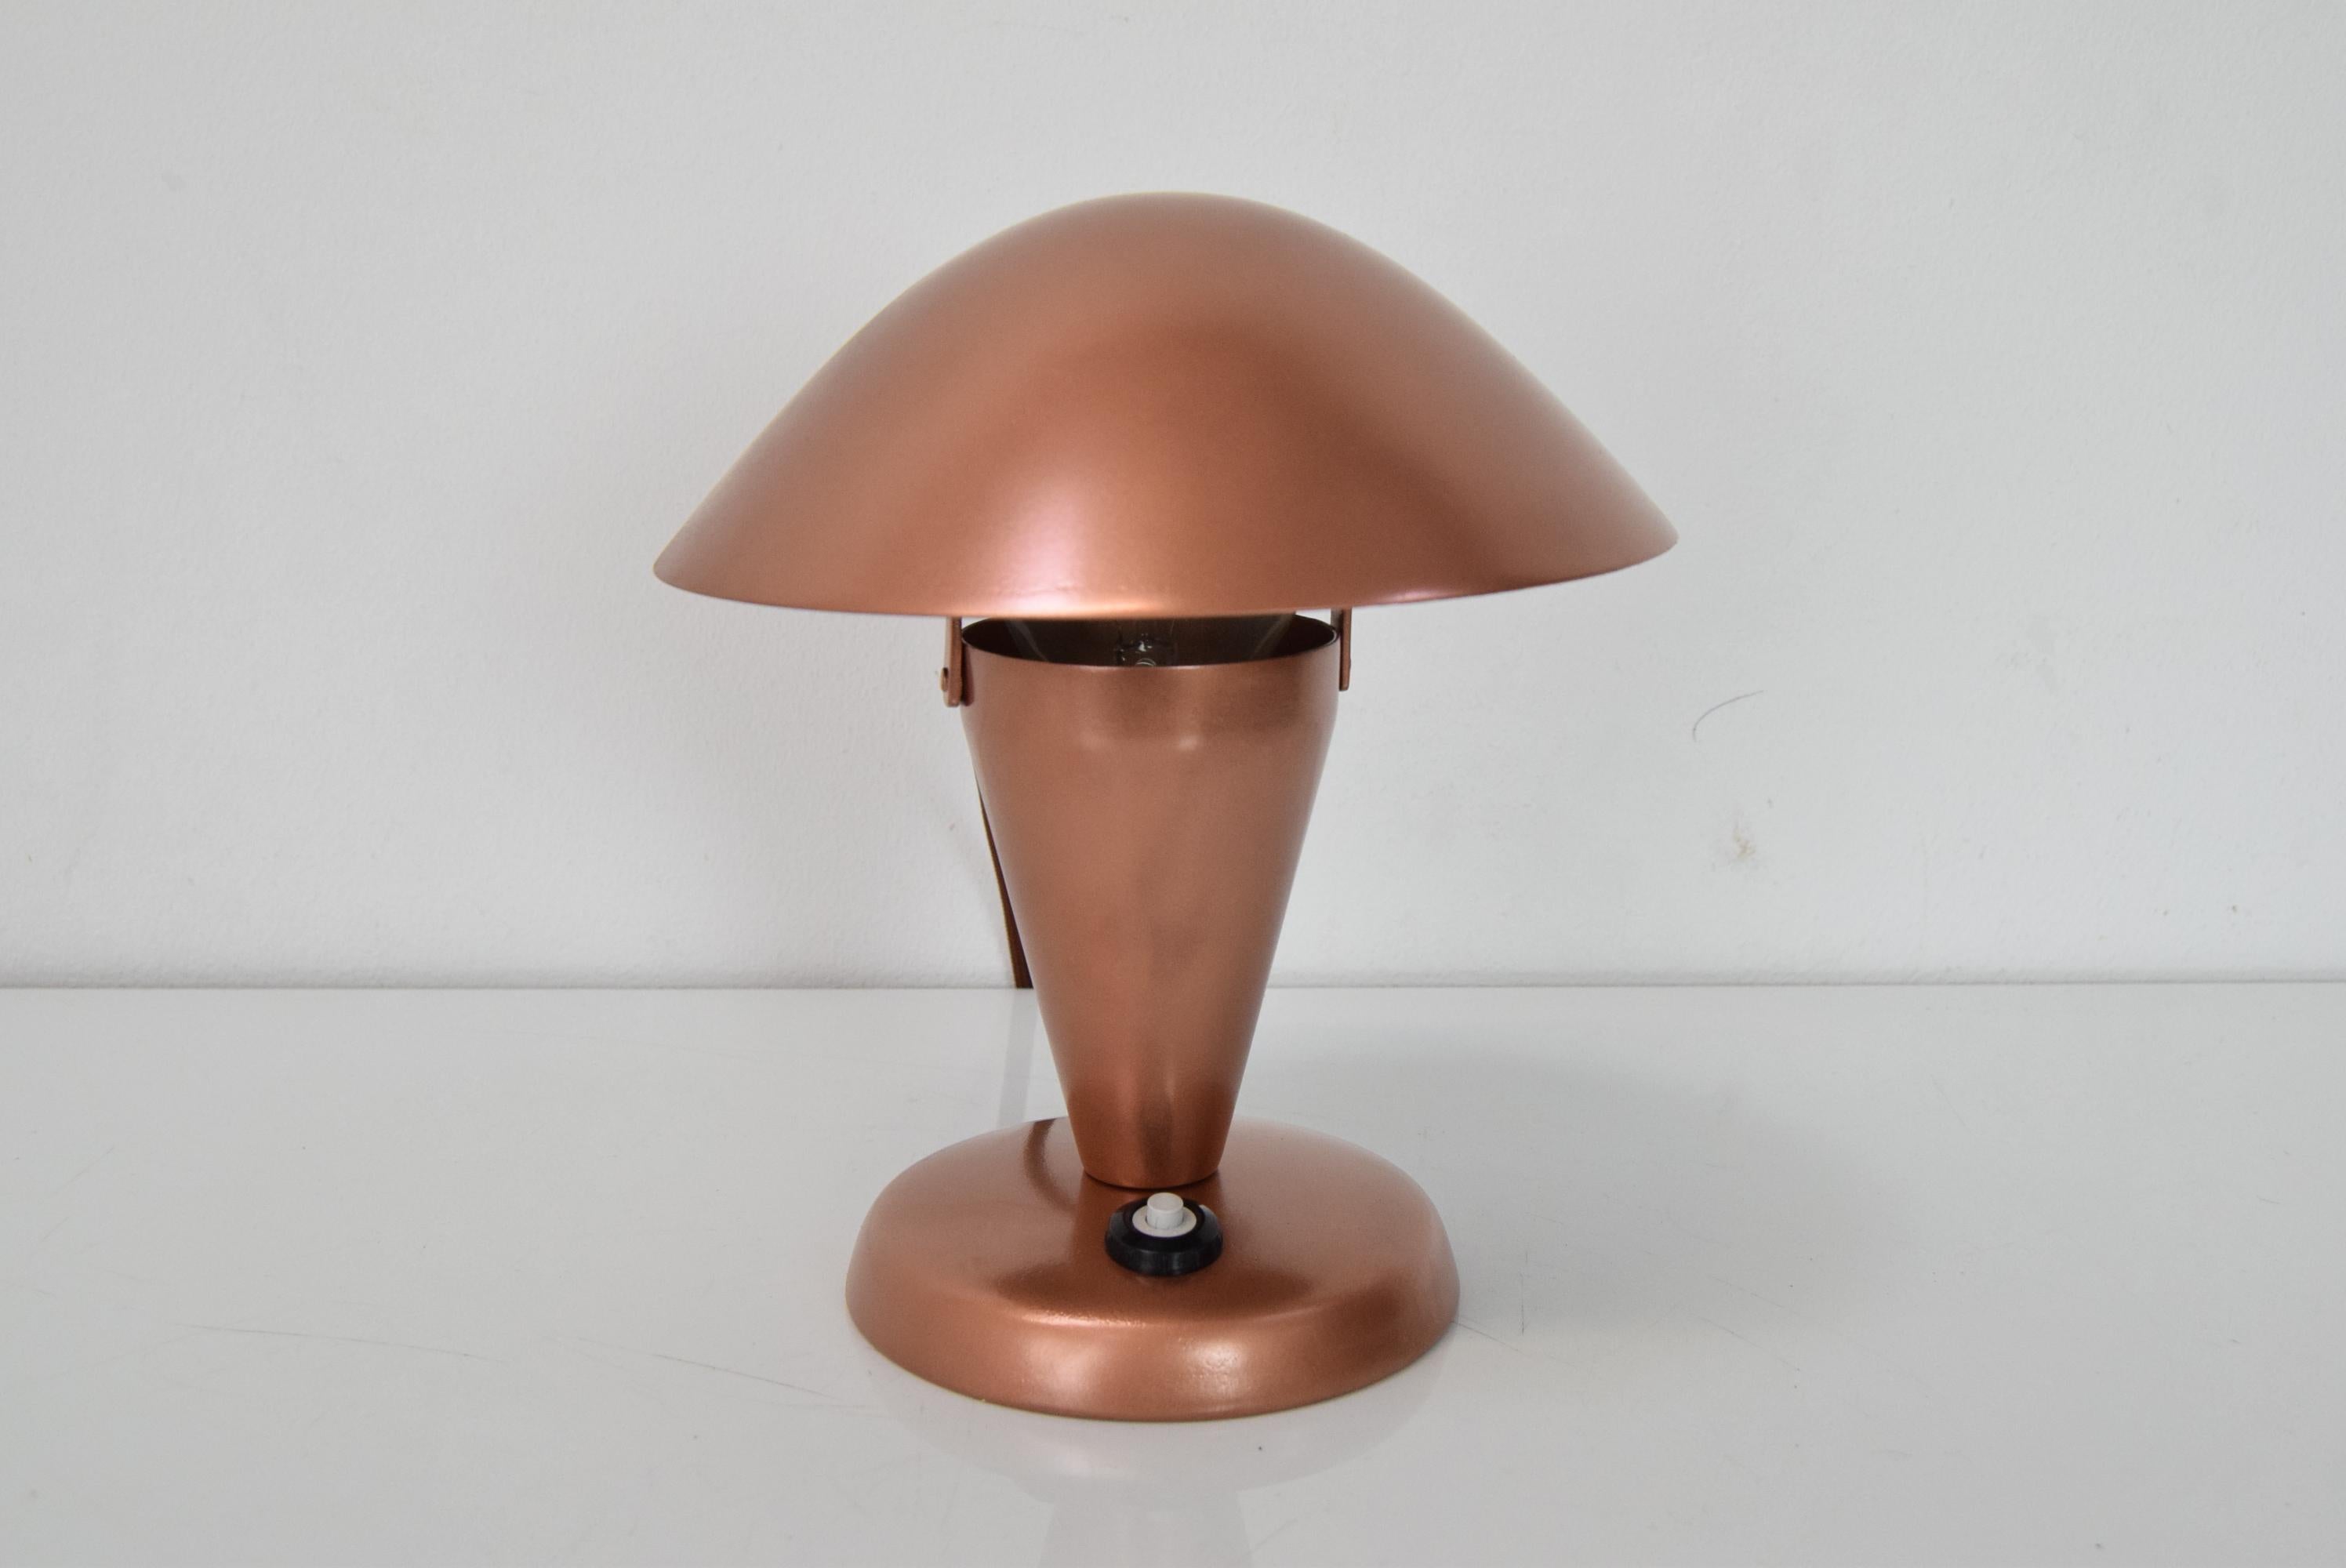 Made in Czechoslovakia
Made of metal
The lamp was completely disassembled and repainted Was fitted with a new electrical installation
1x40W,E27 or E26 bulb
US adapter included
Good original condition